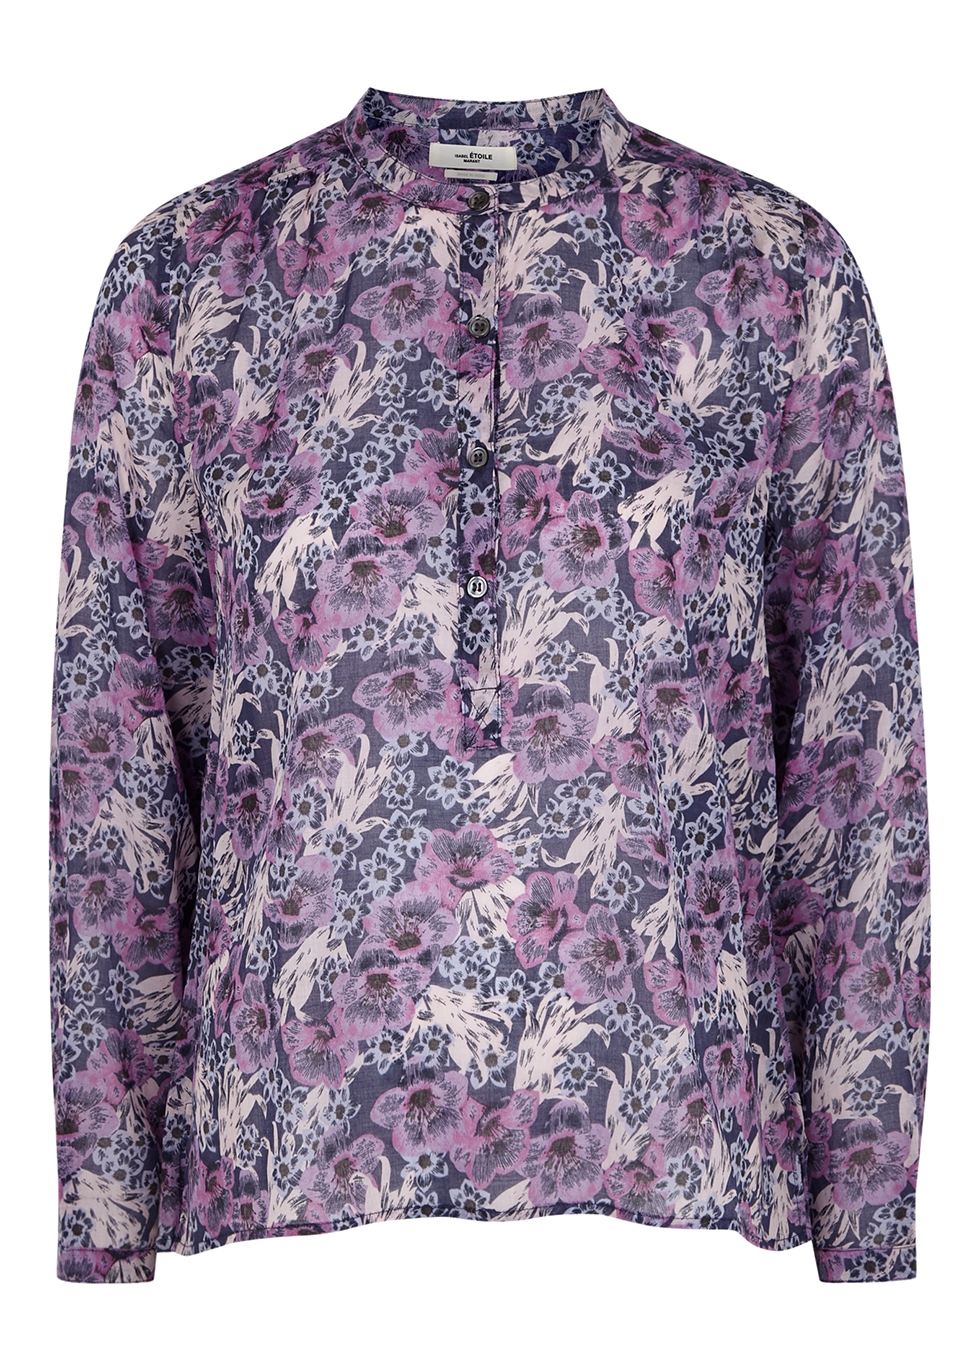 Isabel Marant toileMaria floral-print cotton blouse | DailyMail